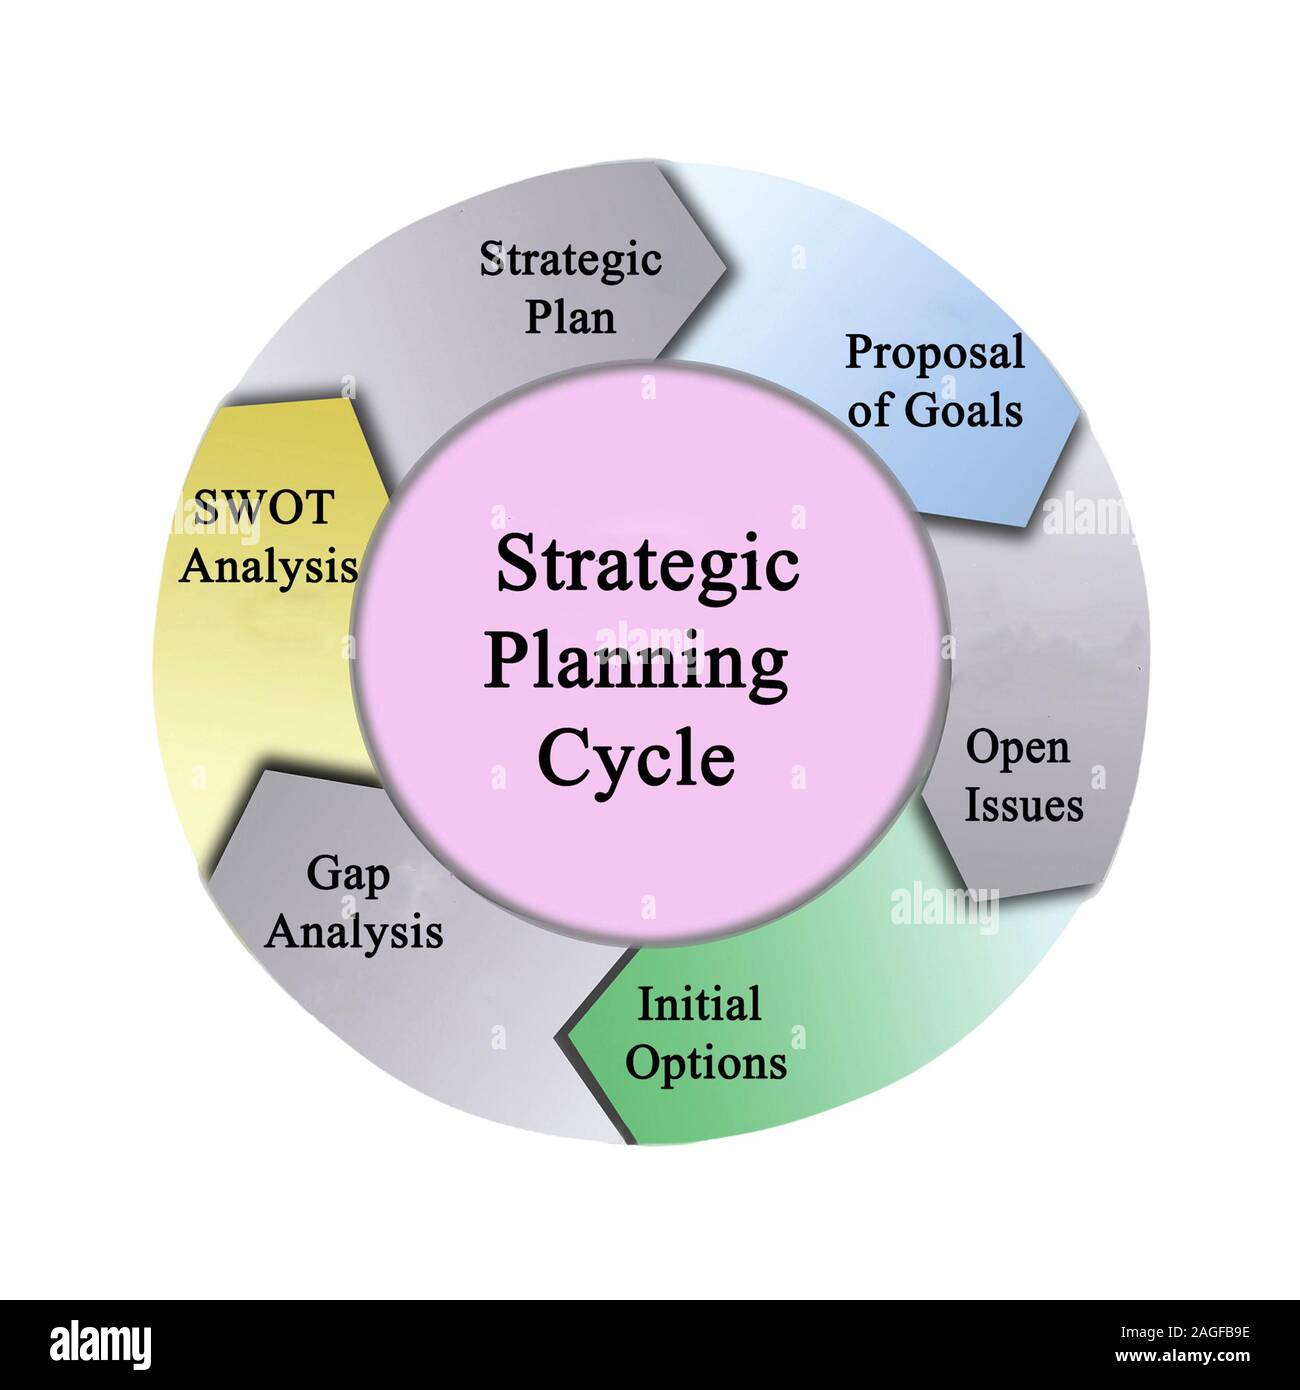 what is strategic planning cycle